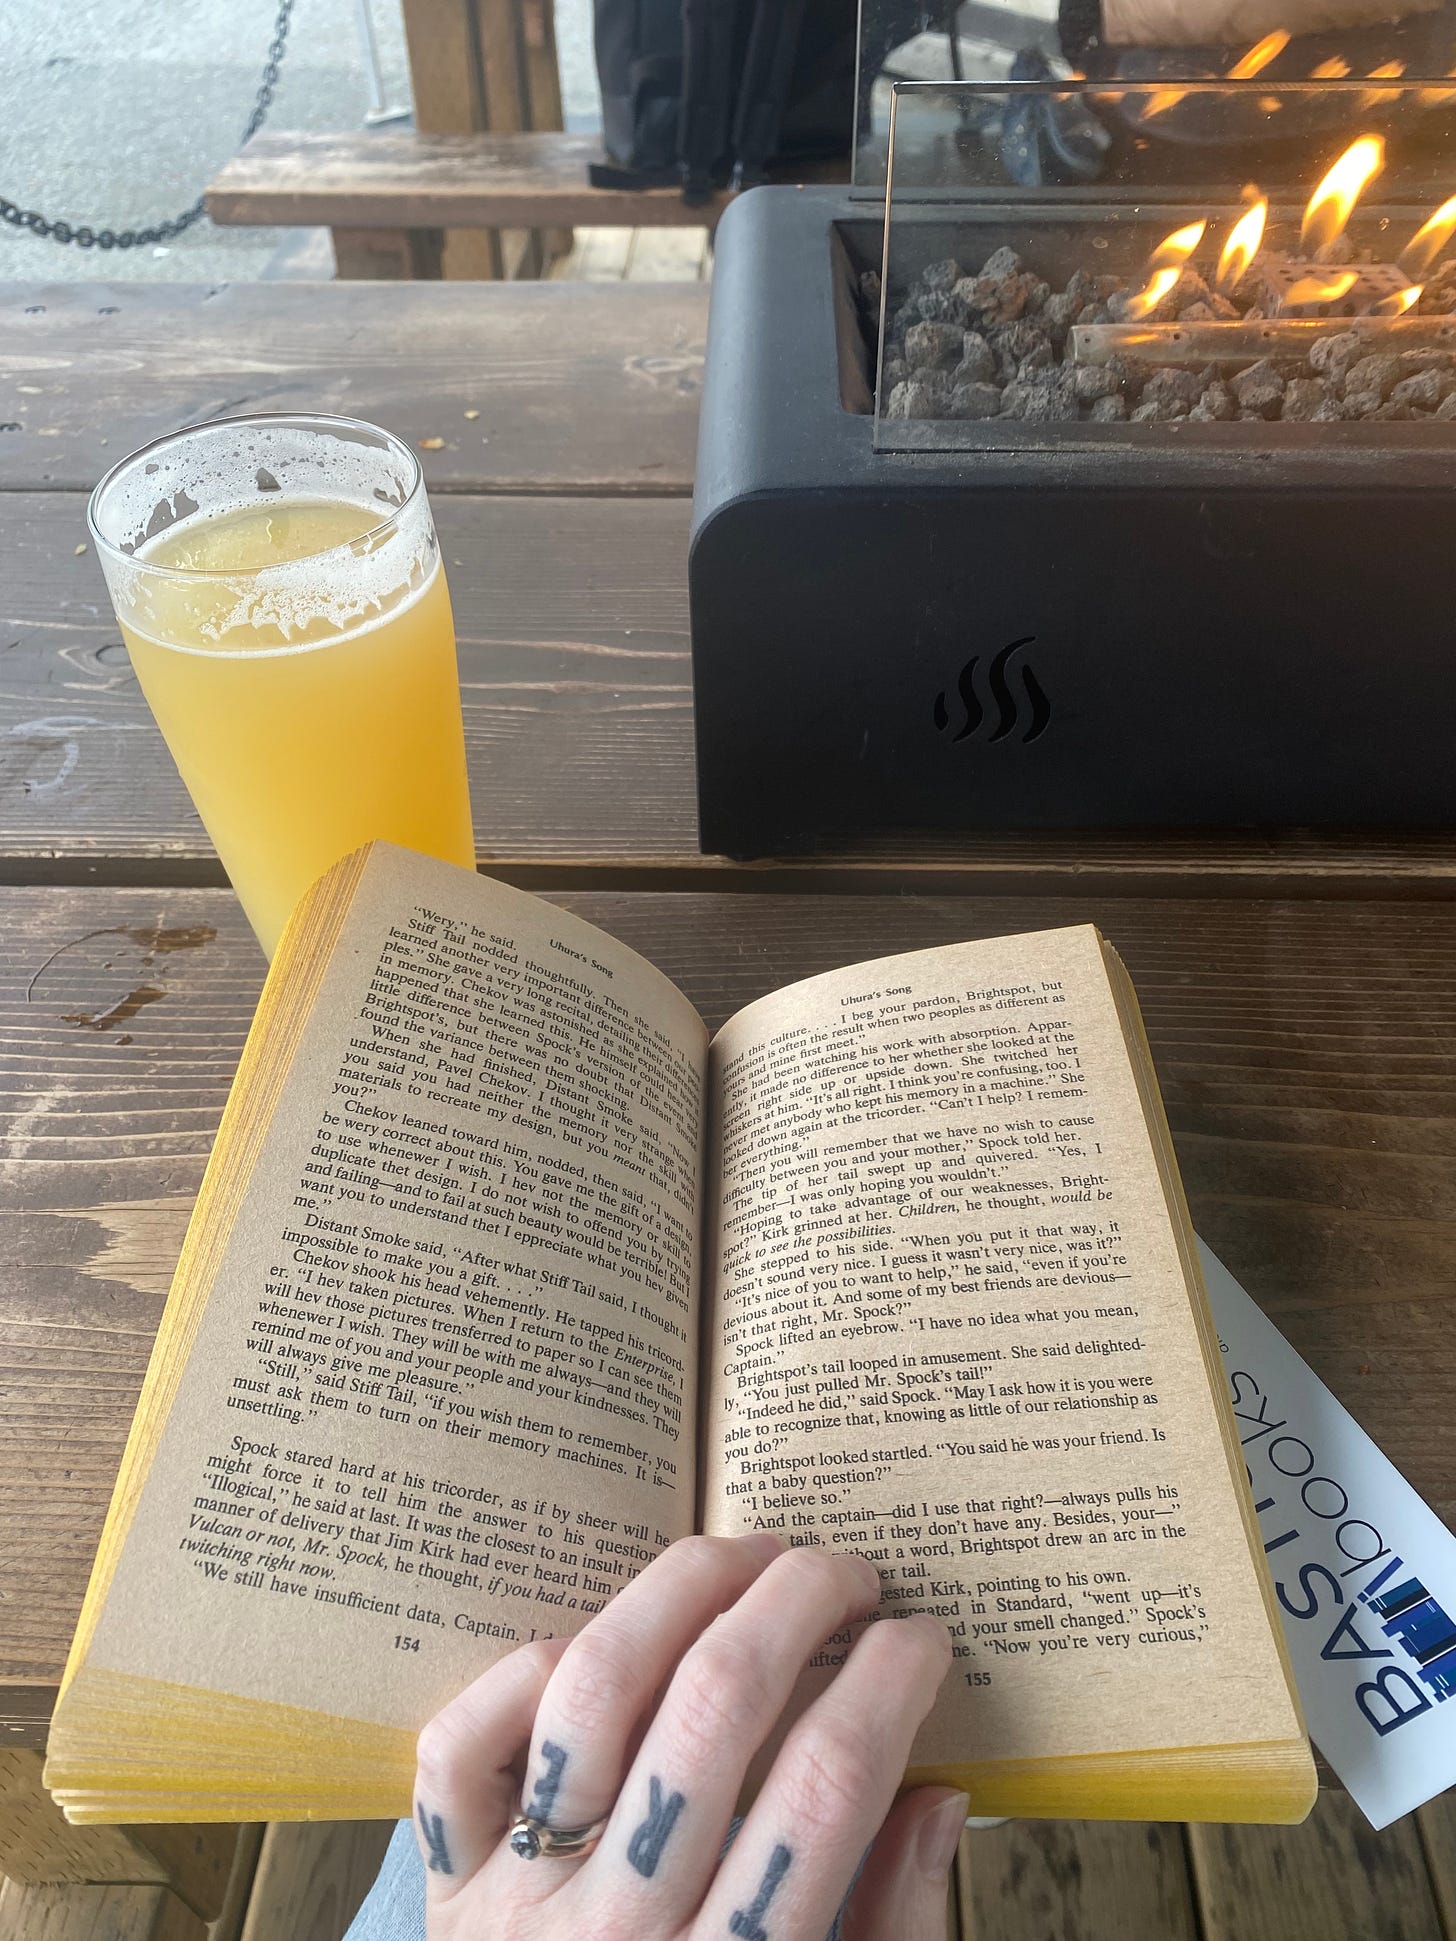 A wooden patio table with a rectangular fire dish with rocks in it. In front of it my hand is holding open a paperback book, "Uhura's Song". Next to the book is a glass of IPA.